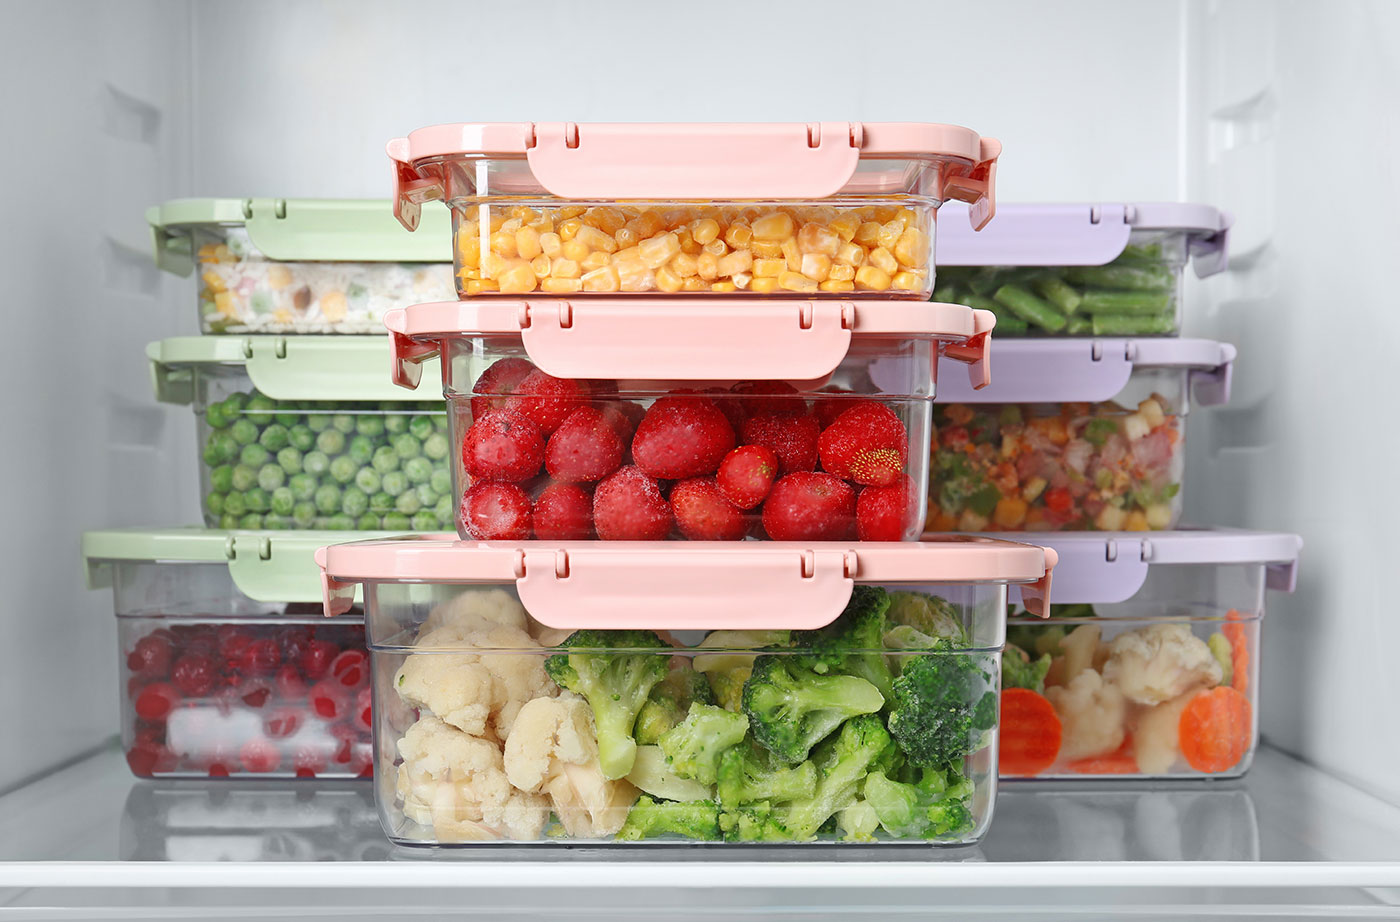 Expert Tips for Freezing Food and Reducing Food Waste